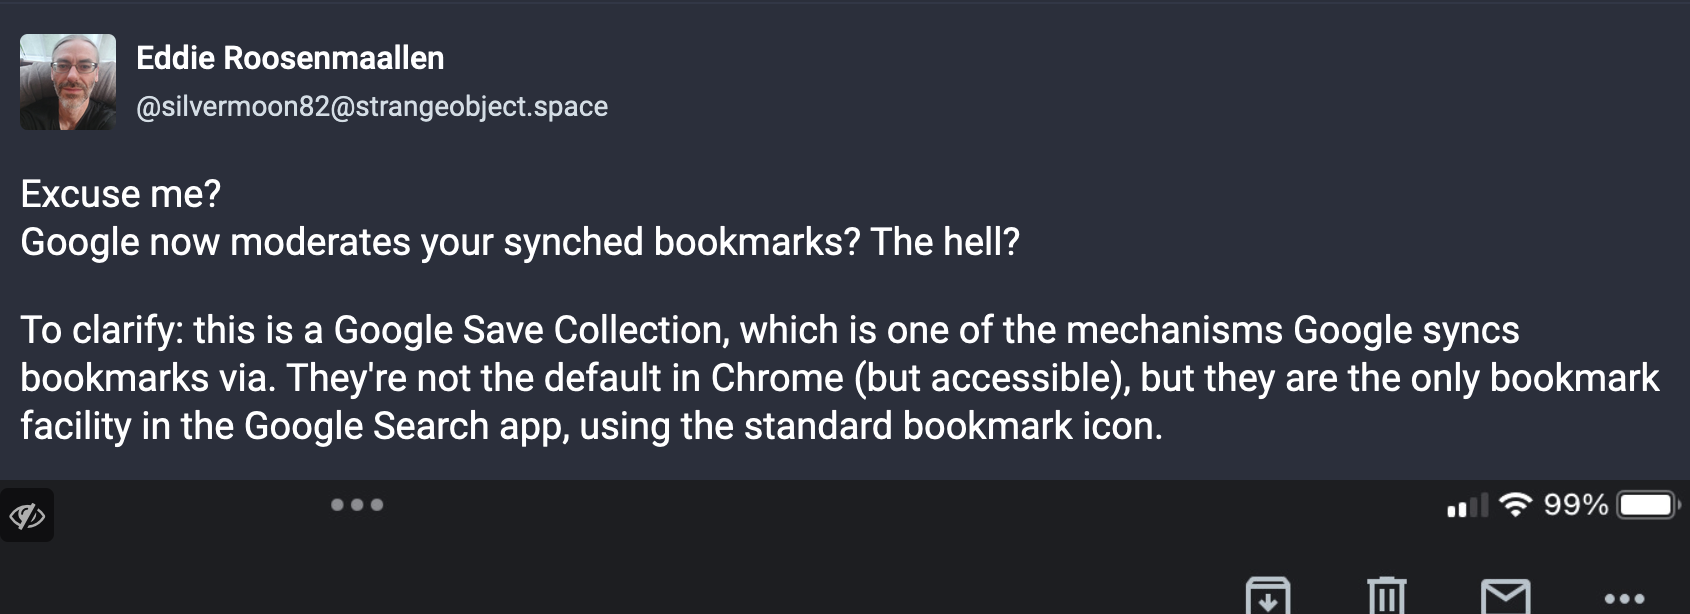 To clarify: this is a Google Save Collection, which is one of the mechanisms Google syncs bookmarks via. They're not the default in Chrome (but accessible), but they are the only bookmark facility in the Google Search app, using the standard bookmark icon.